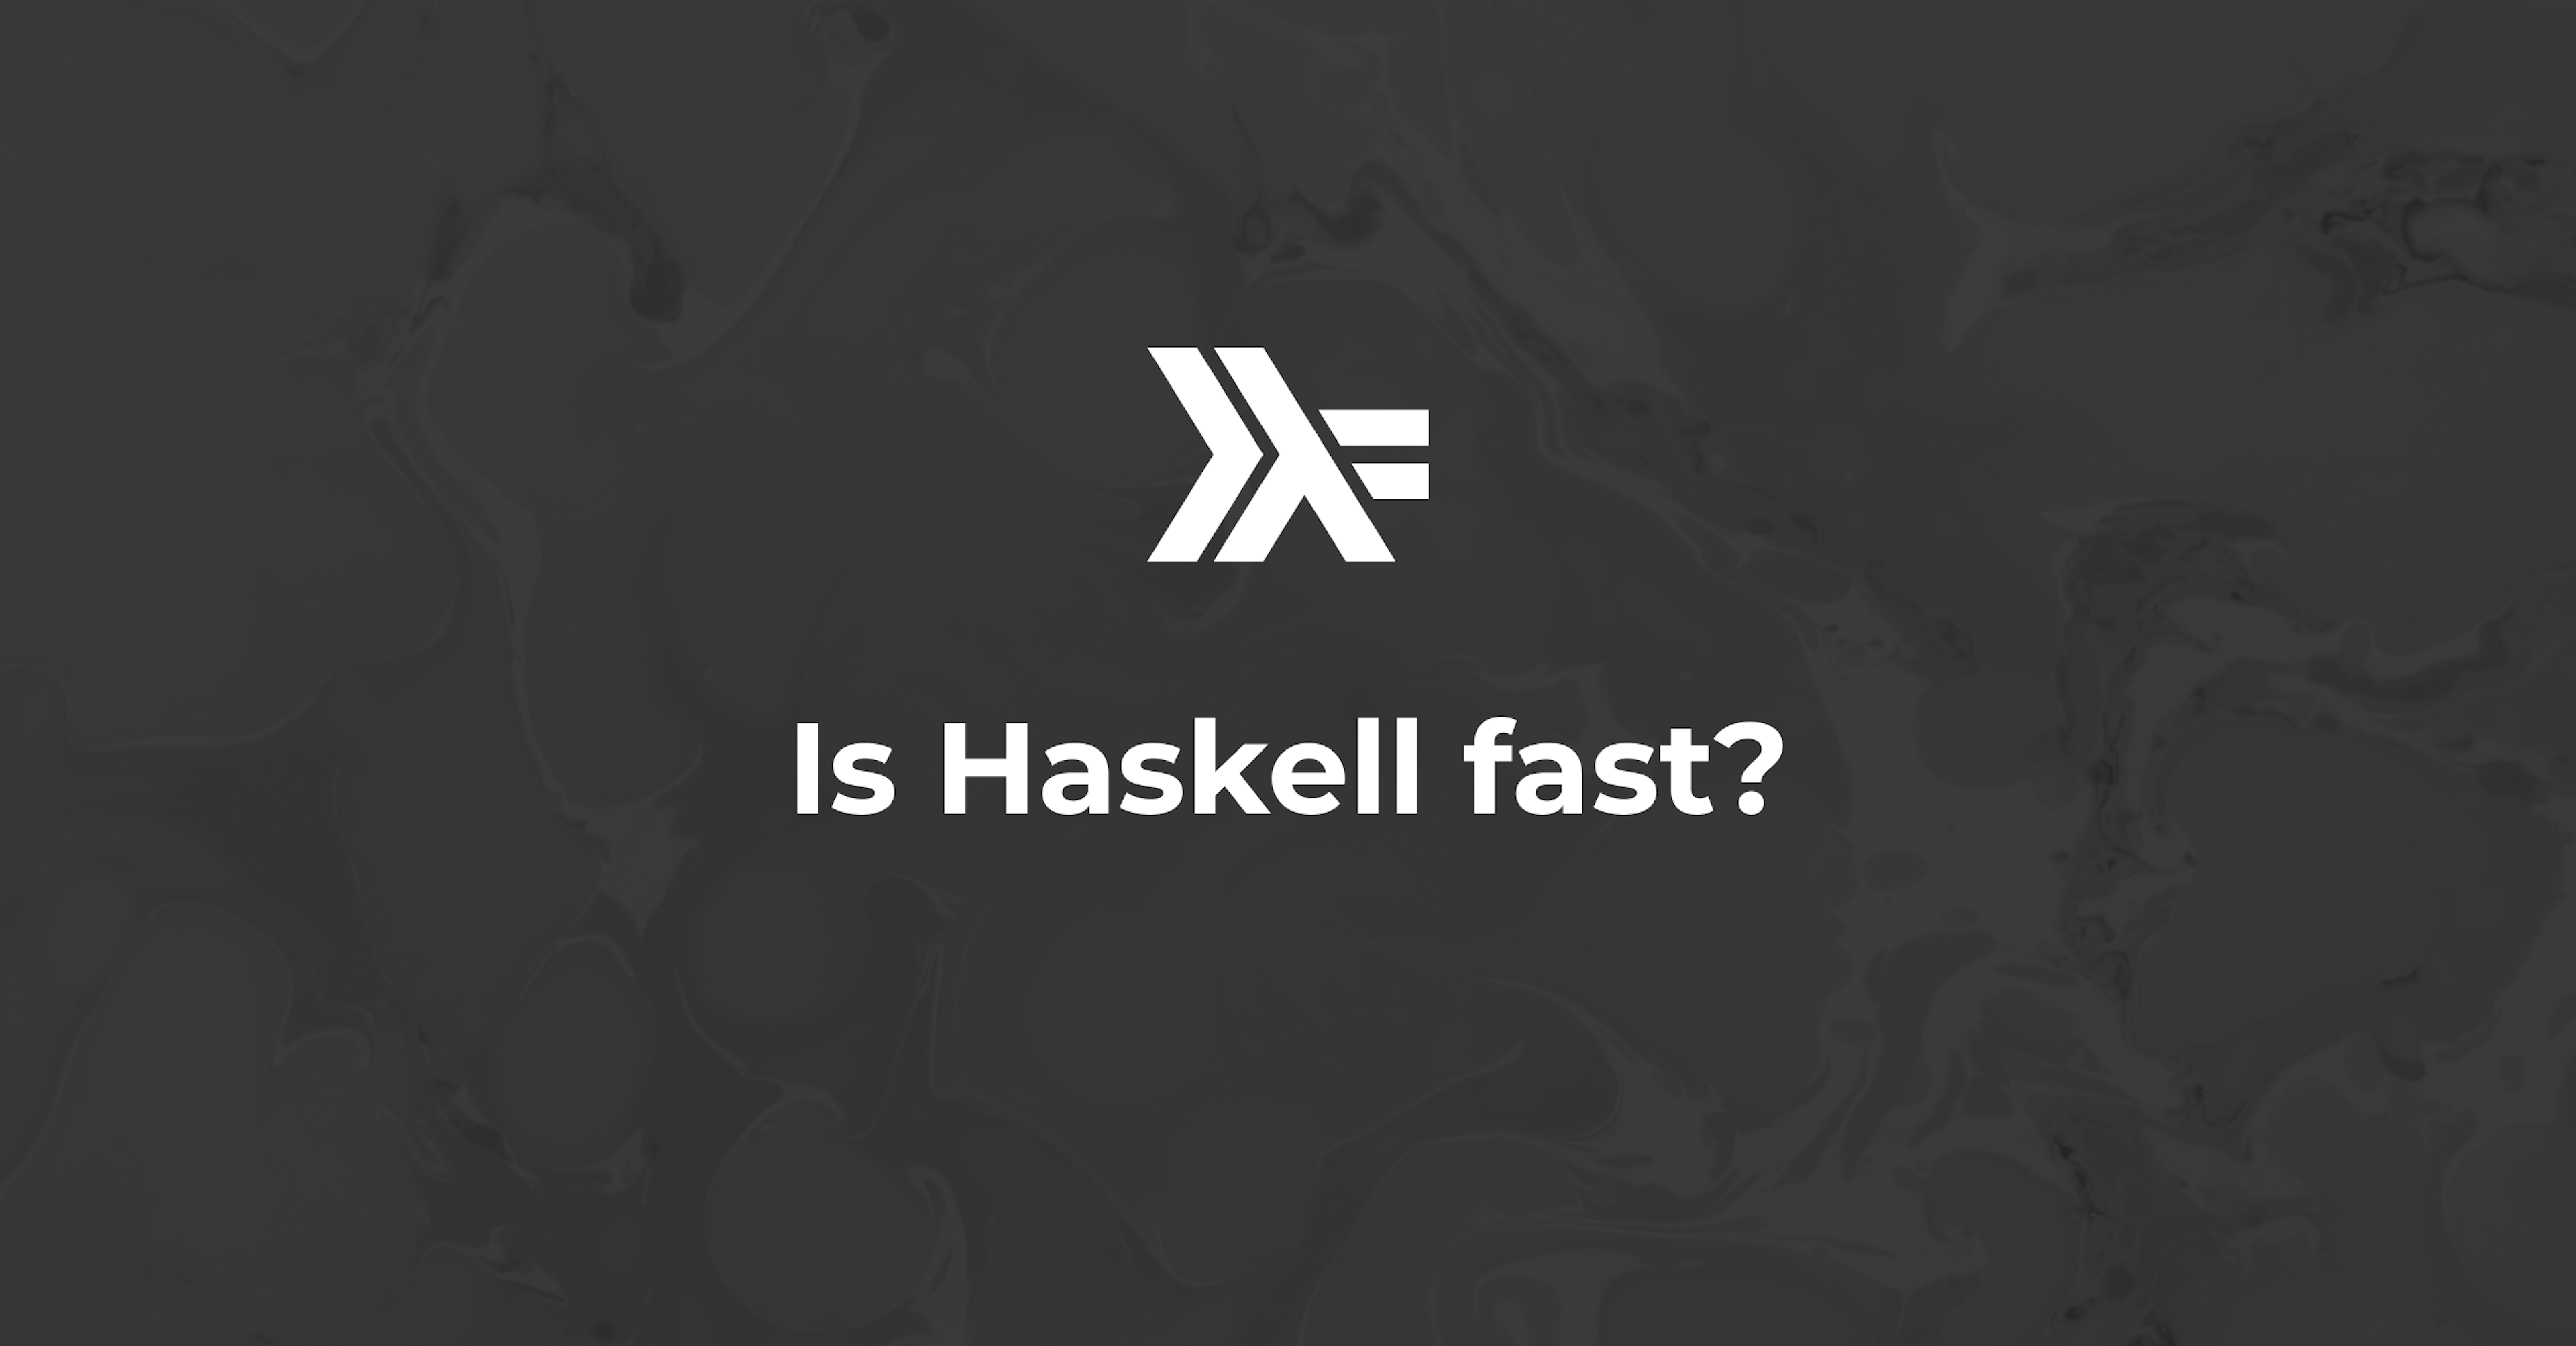 Is Haskell fast?